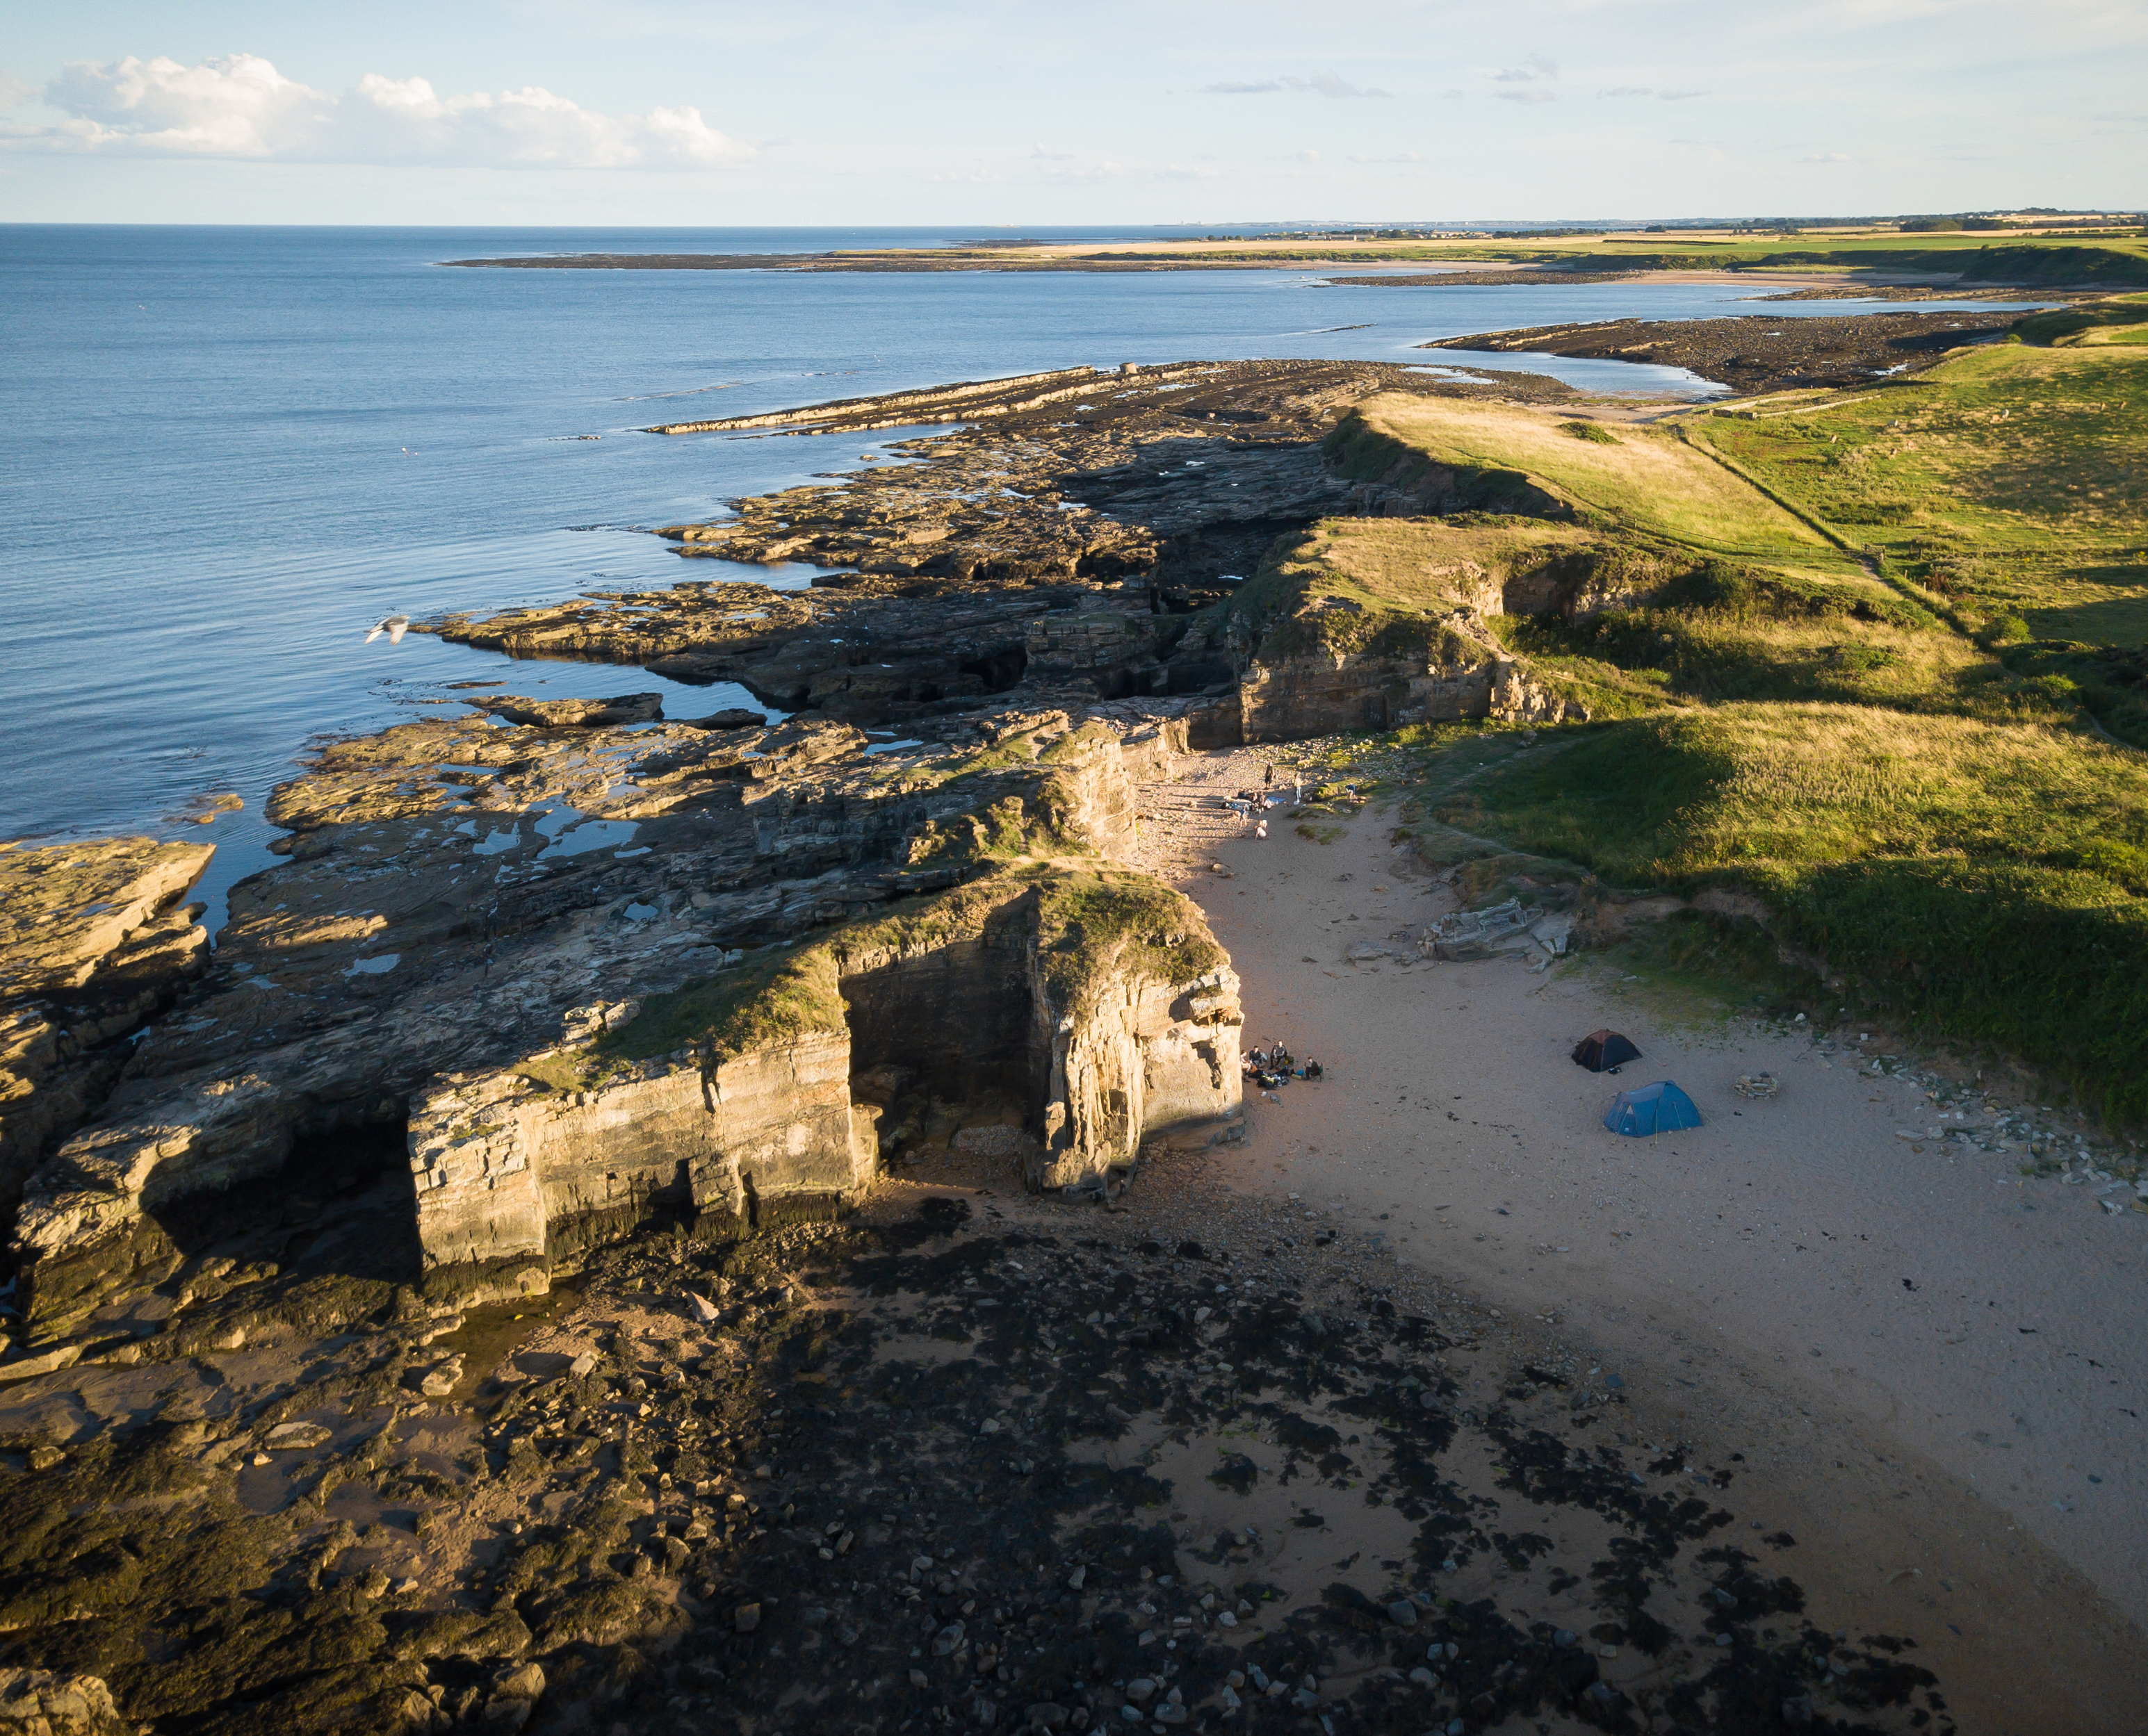 Present-day Howick, England, where a tsunami may have hit over 8,000 years ago. (Craig Richards/Getty Images)